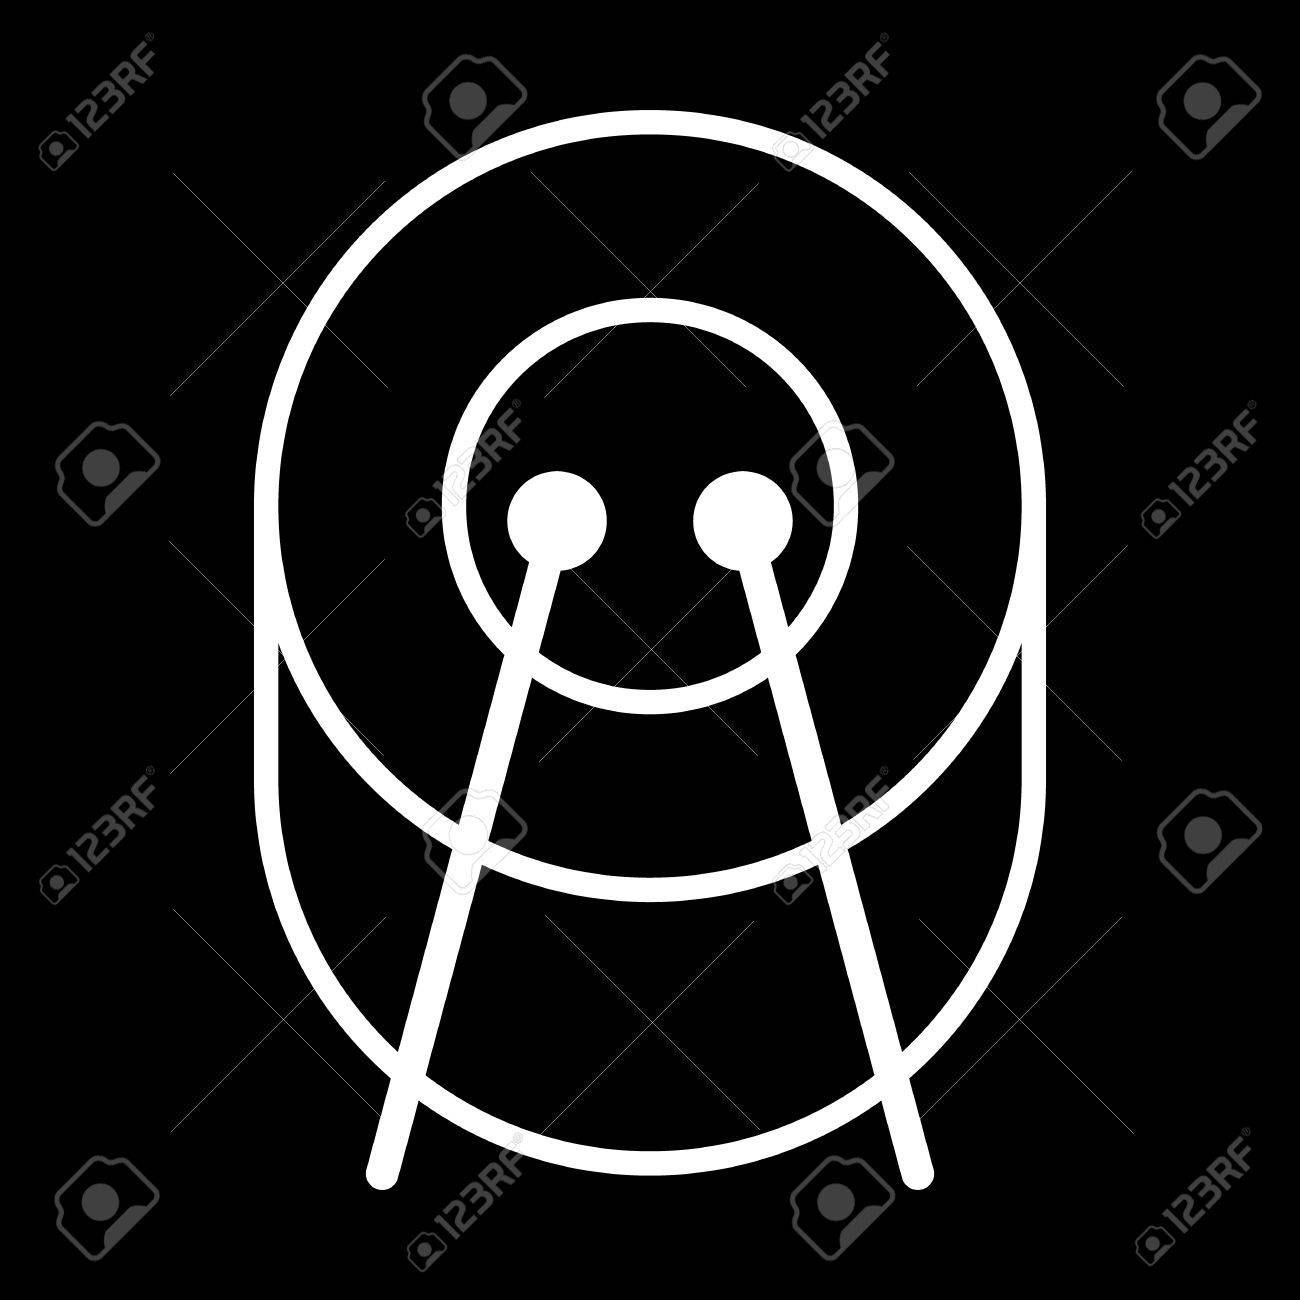 Drum Line Art Vector Icon Isolated On A Black Background Royalty